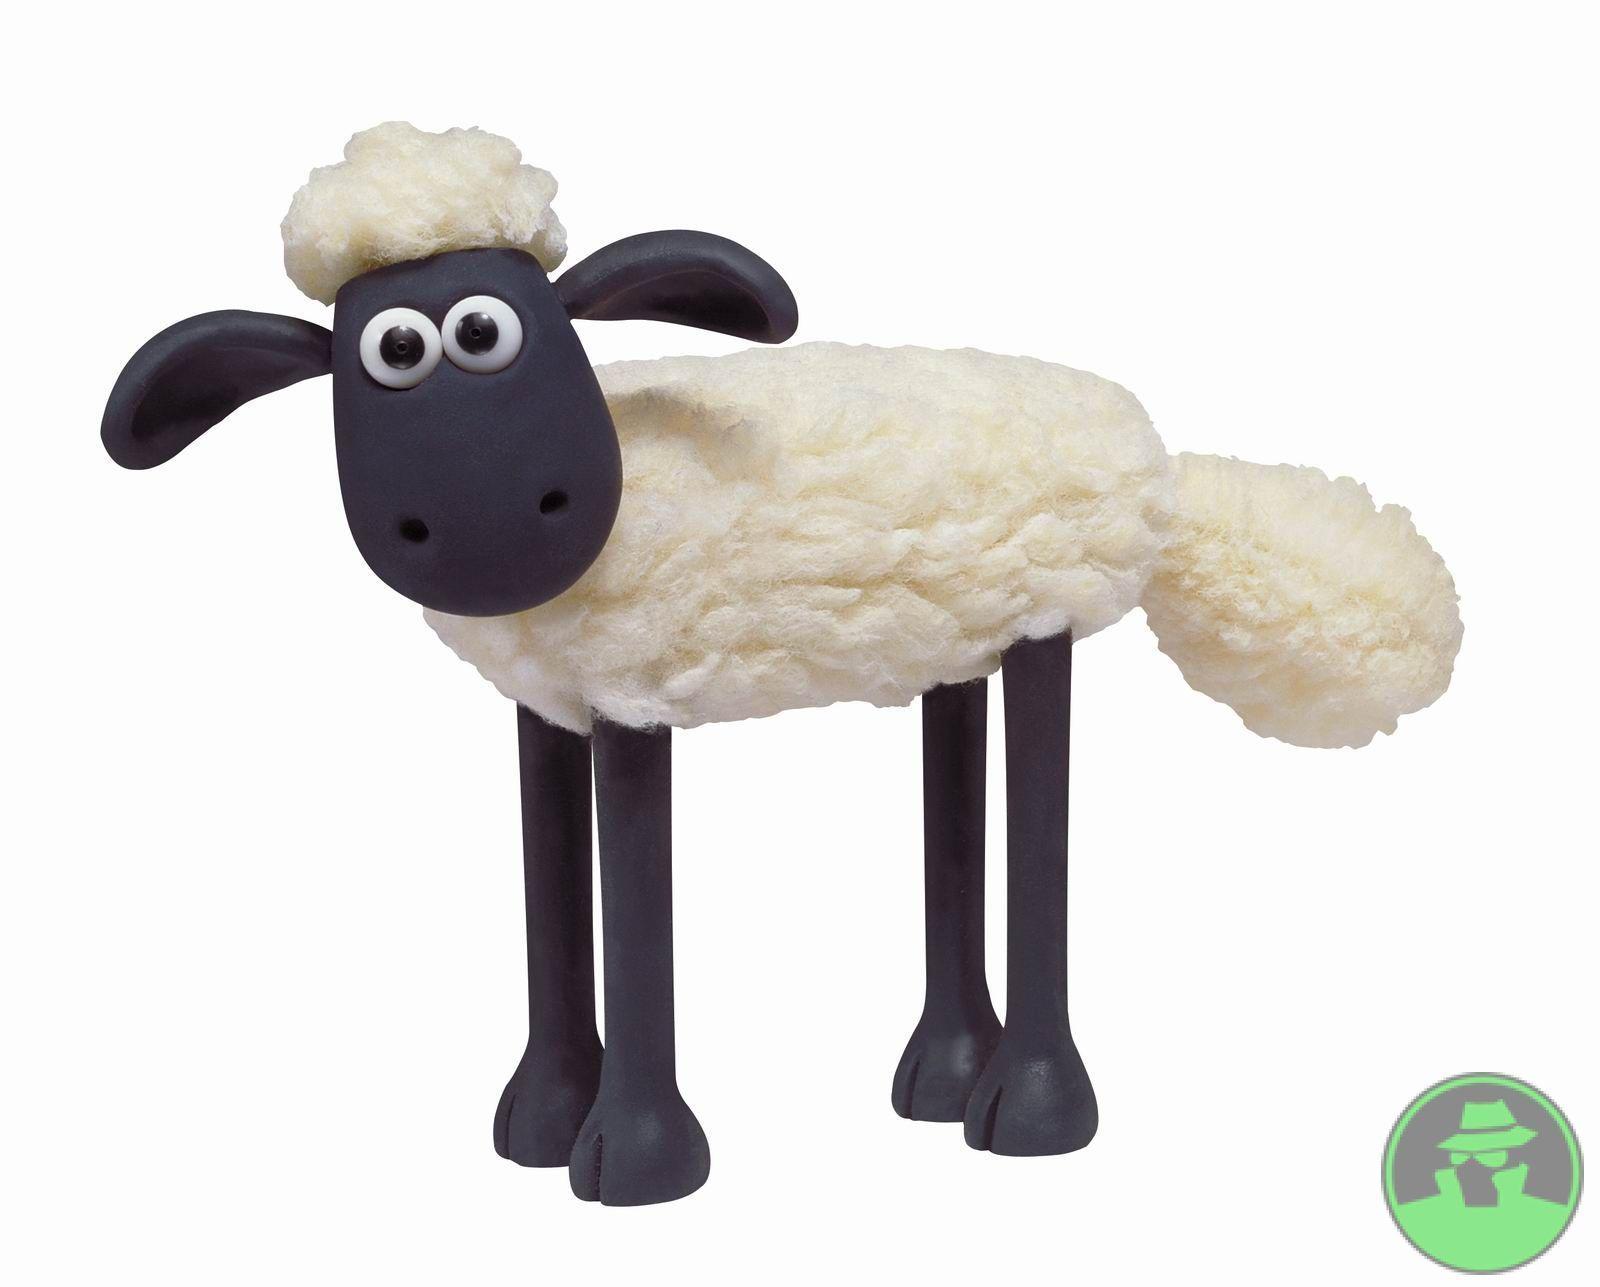 39 Top Photos Shaun The Sheep Decorations - 17 Best images about Shaun the Sheep on Pinterest ...